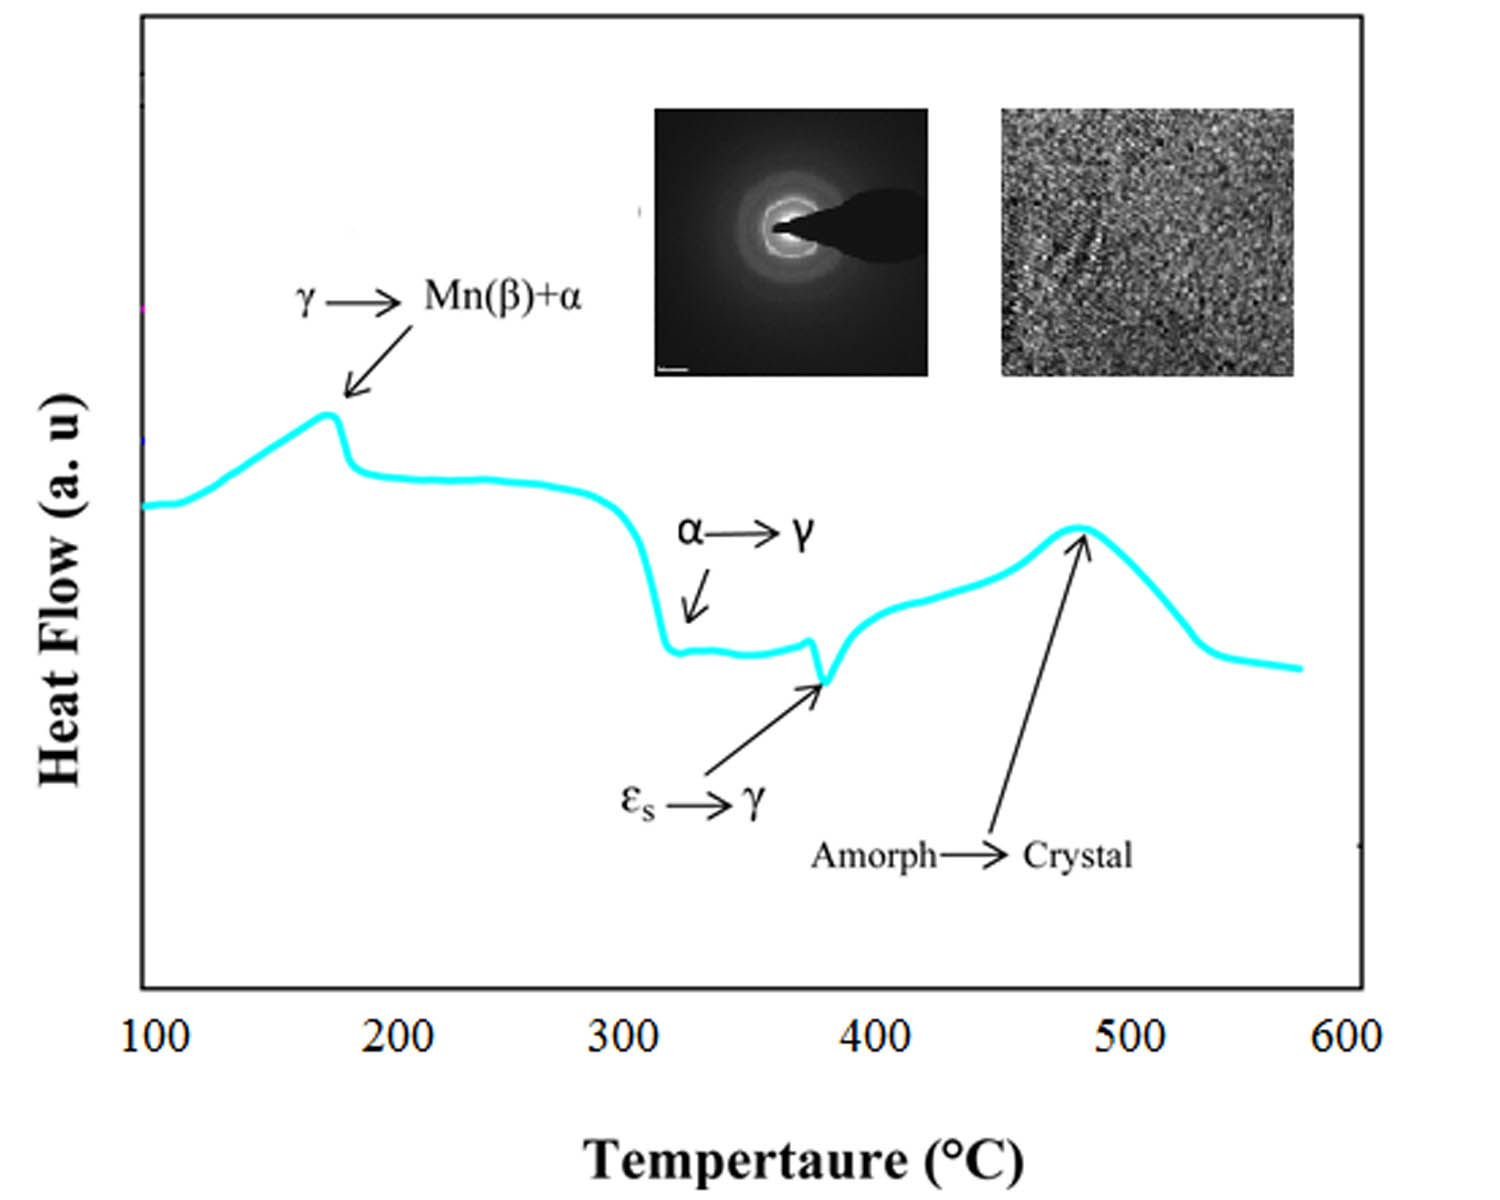 Synthesis and sintering of Fe-32Mn-6Si shape memory alloys prepared by mechanical alloying